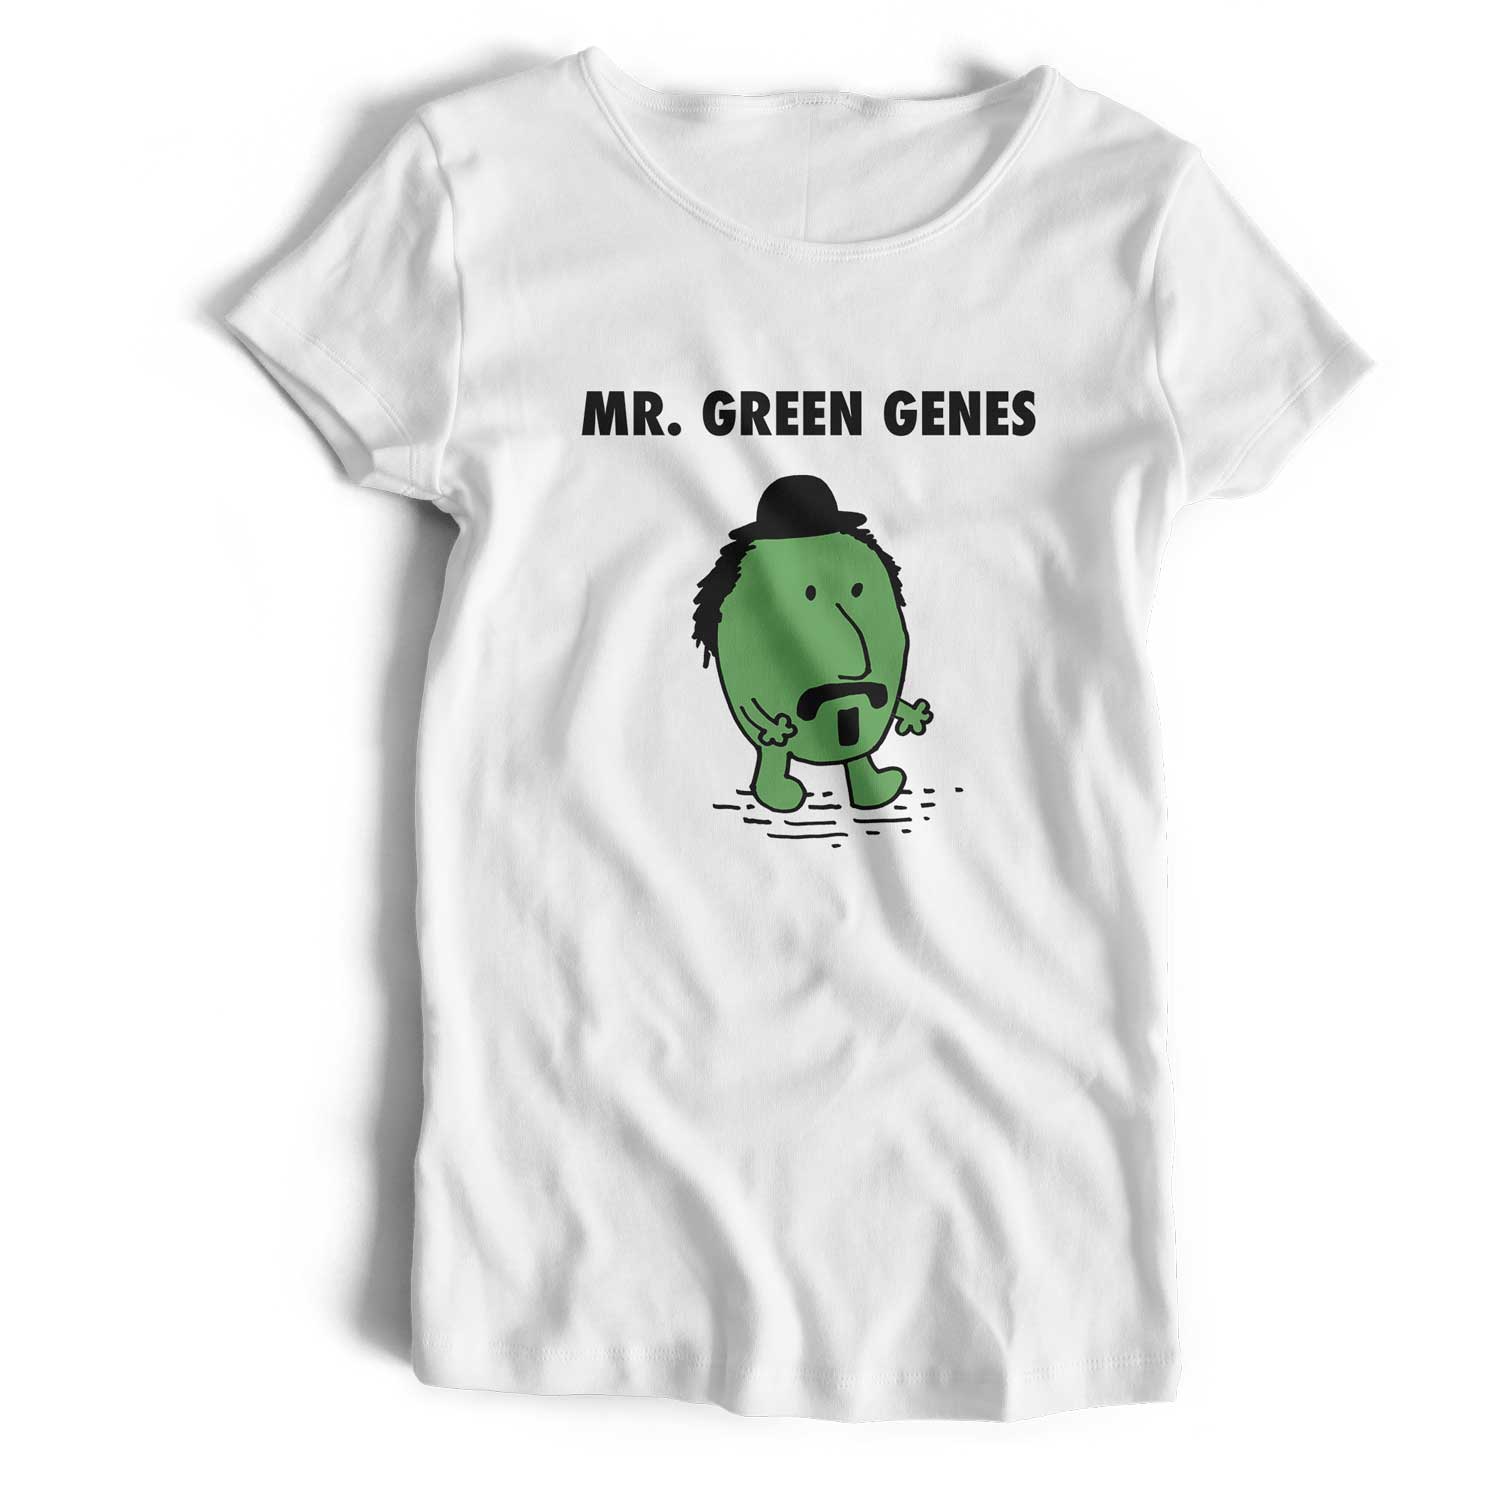 Inspired by Frank Zappa T shirt - Mr. Green Genes Unofficial